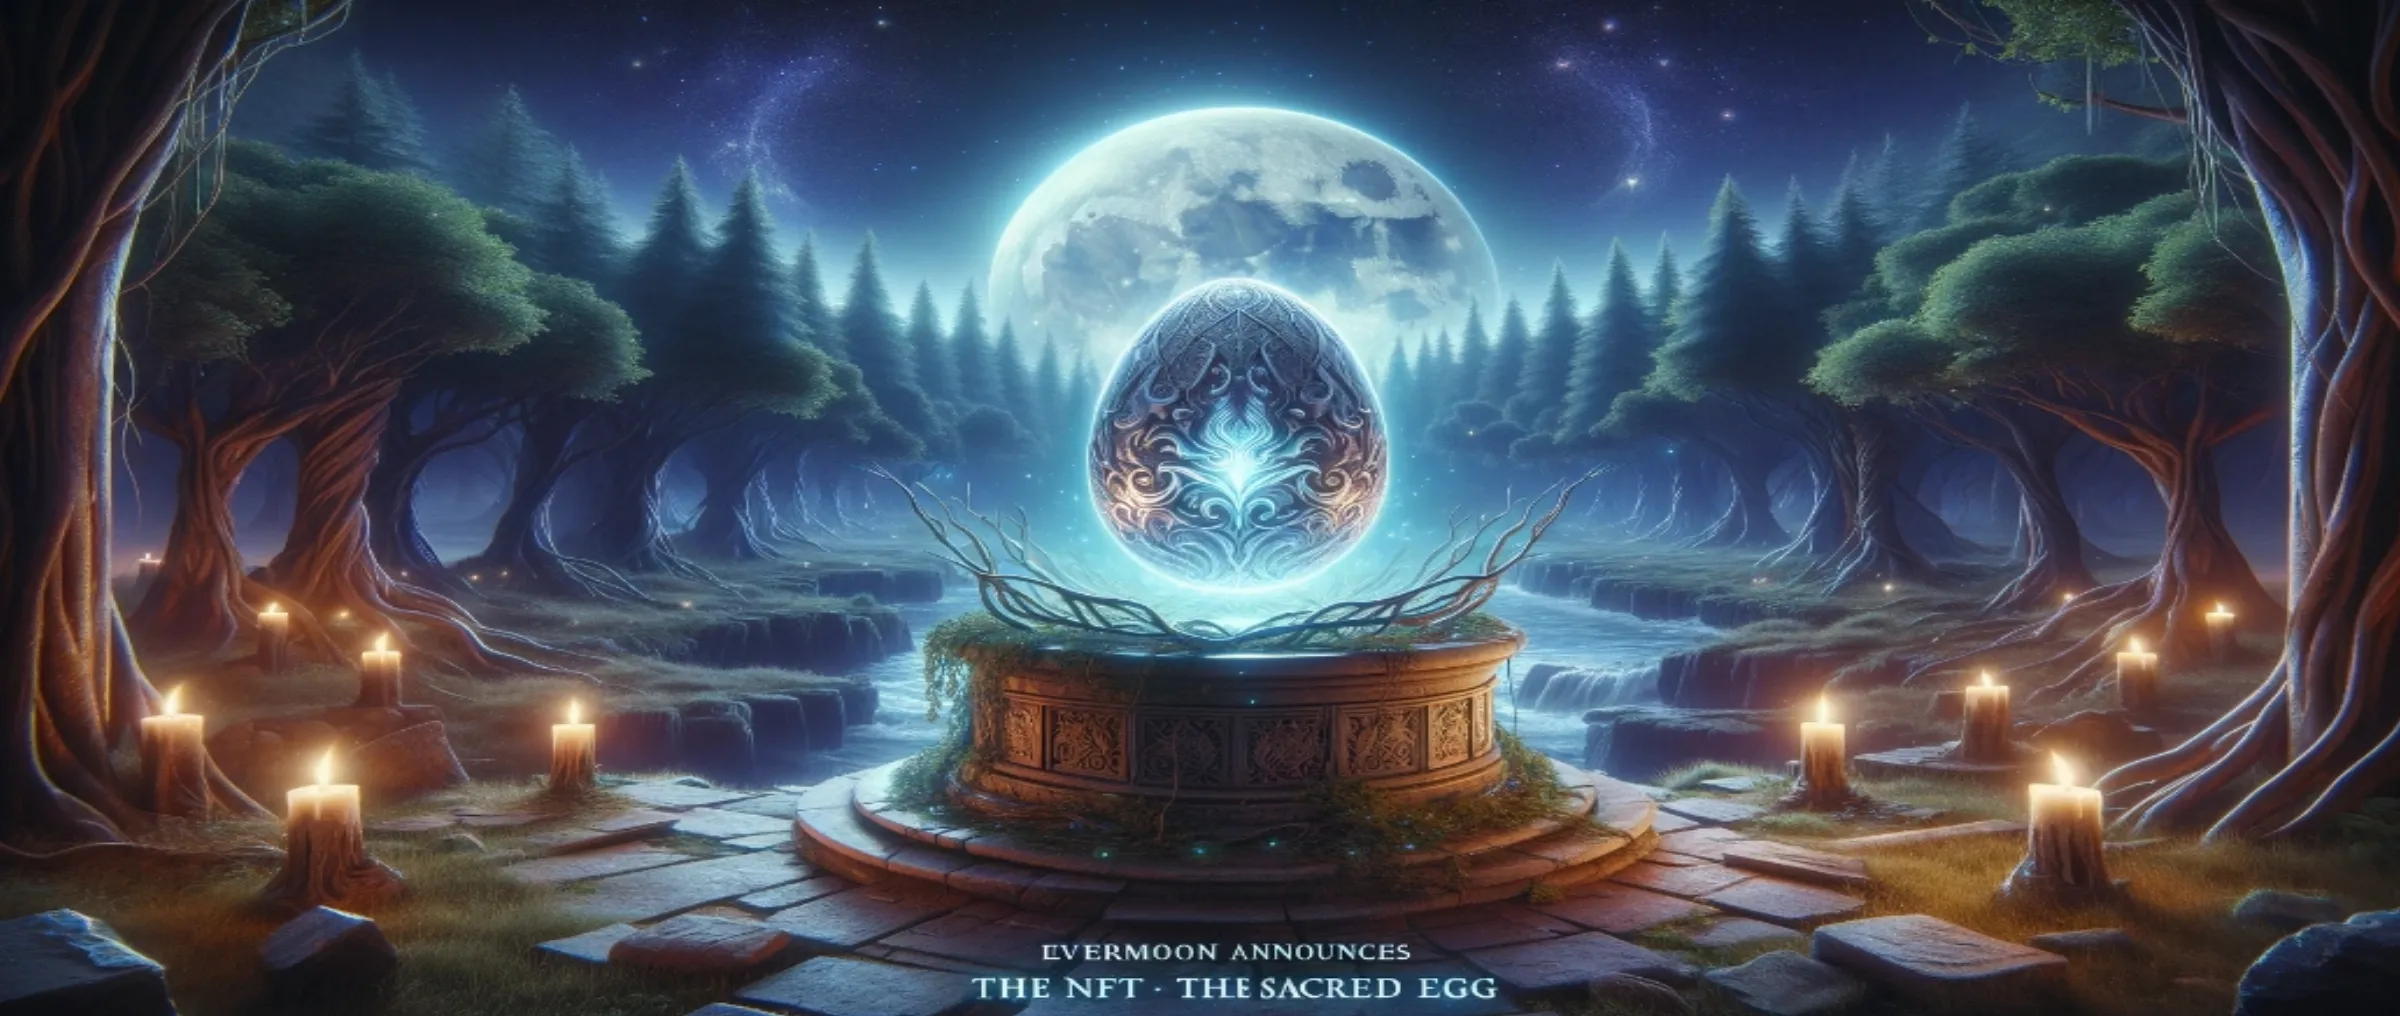 Evermoon announces the distribution of the NFT "Sacred Egg"